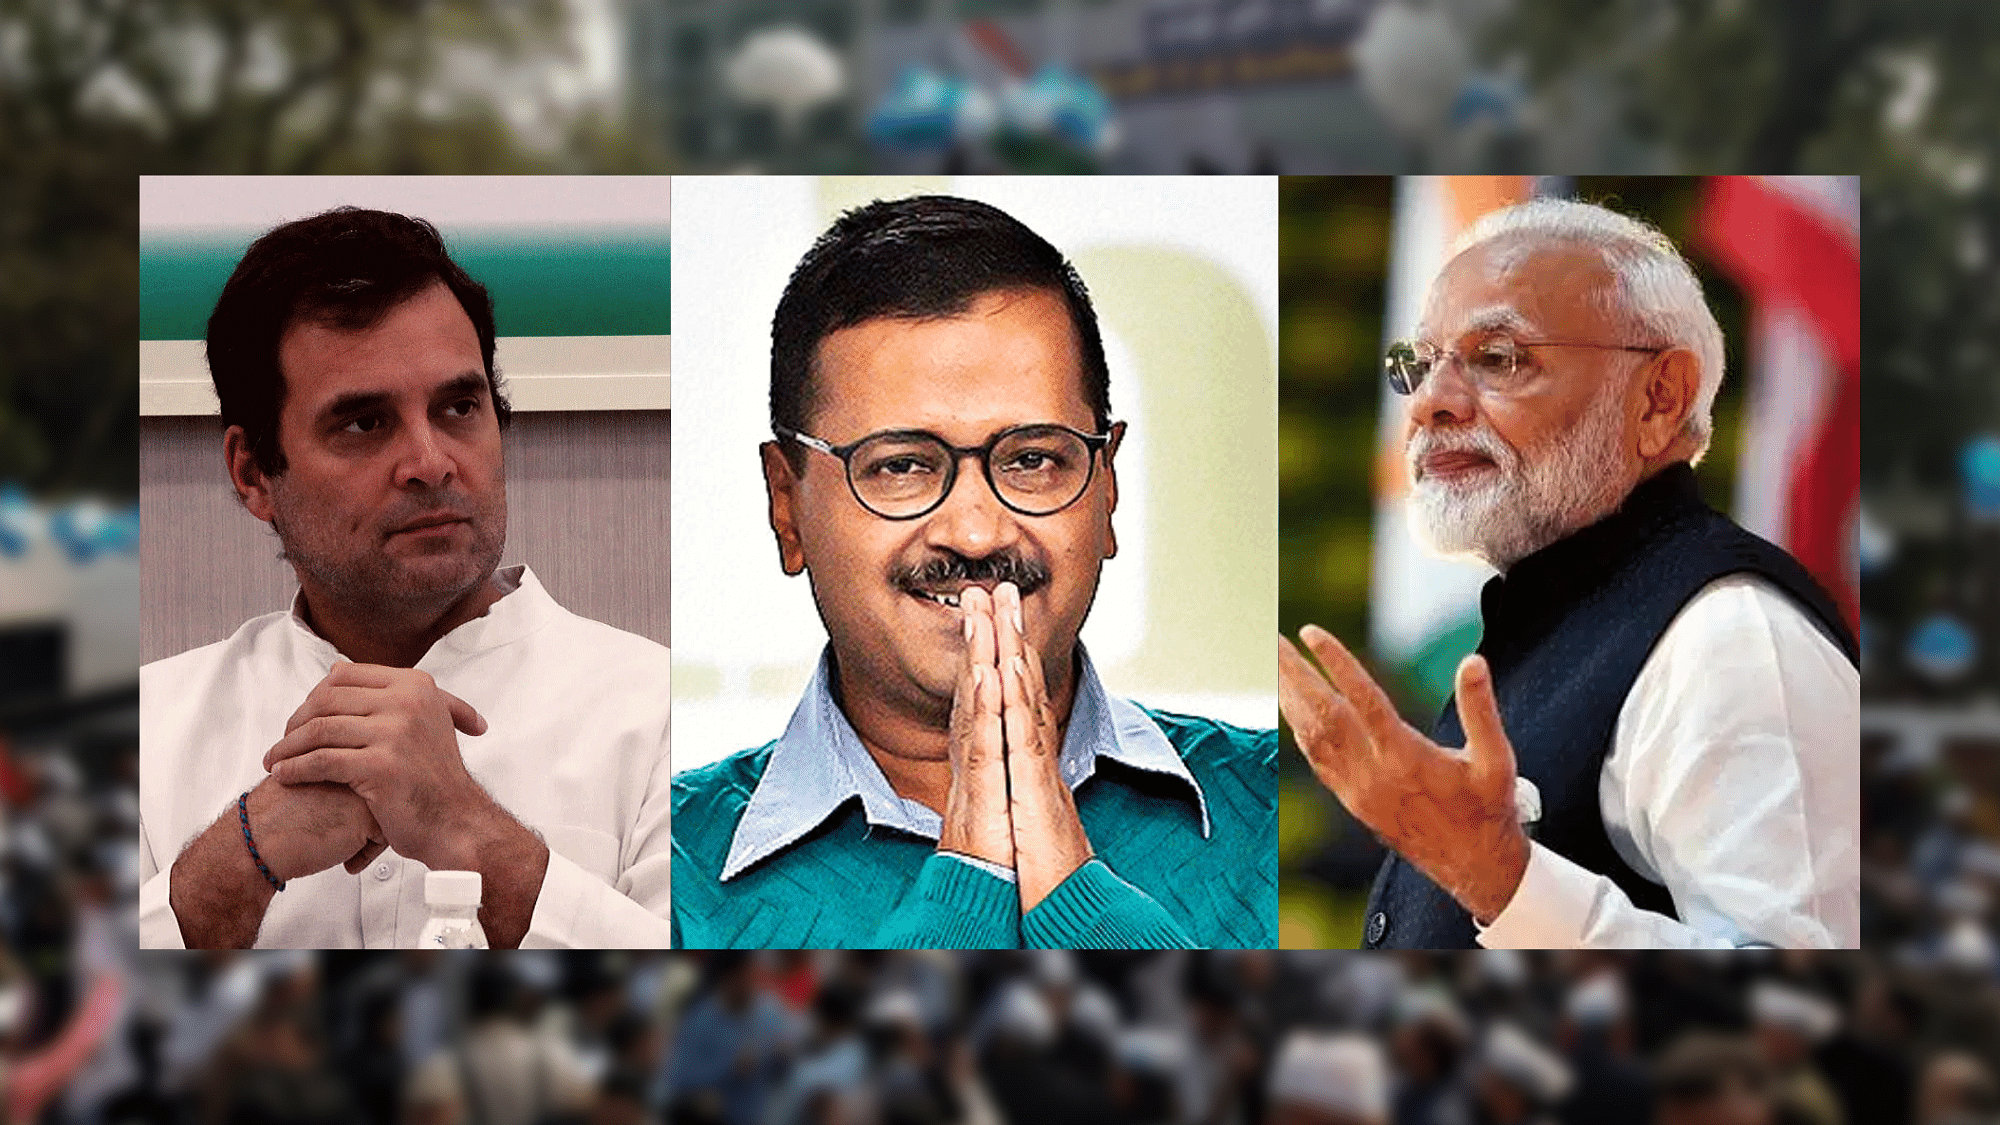 As the Aam Aadmi Party secures another emphatic victory in the capital, we take a look at the changing vote shares of AAP, BJP and Congress over these past three elections.